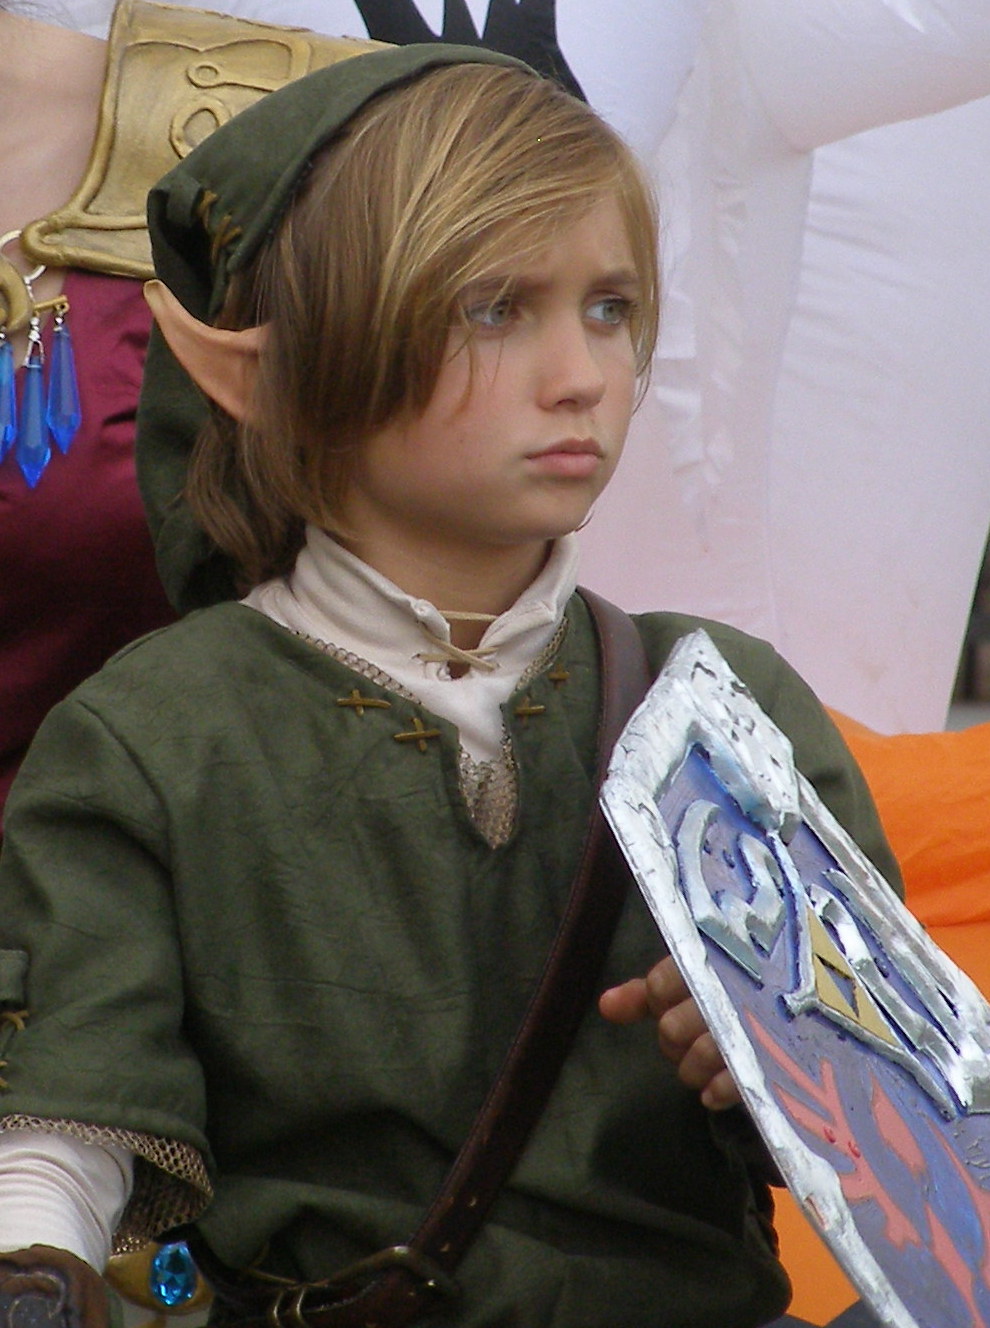 Ryan Veronick is the as Link from twilight princess. 2013